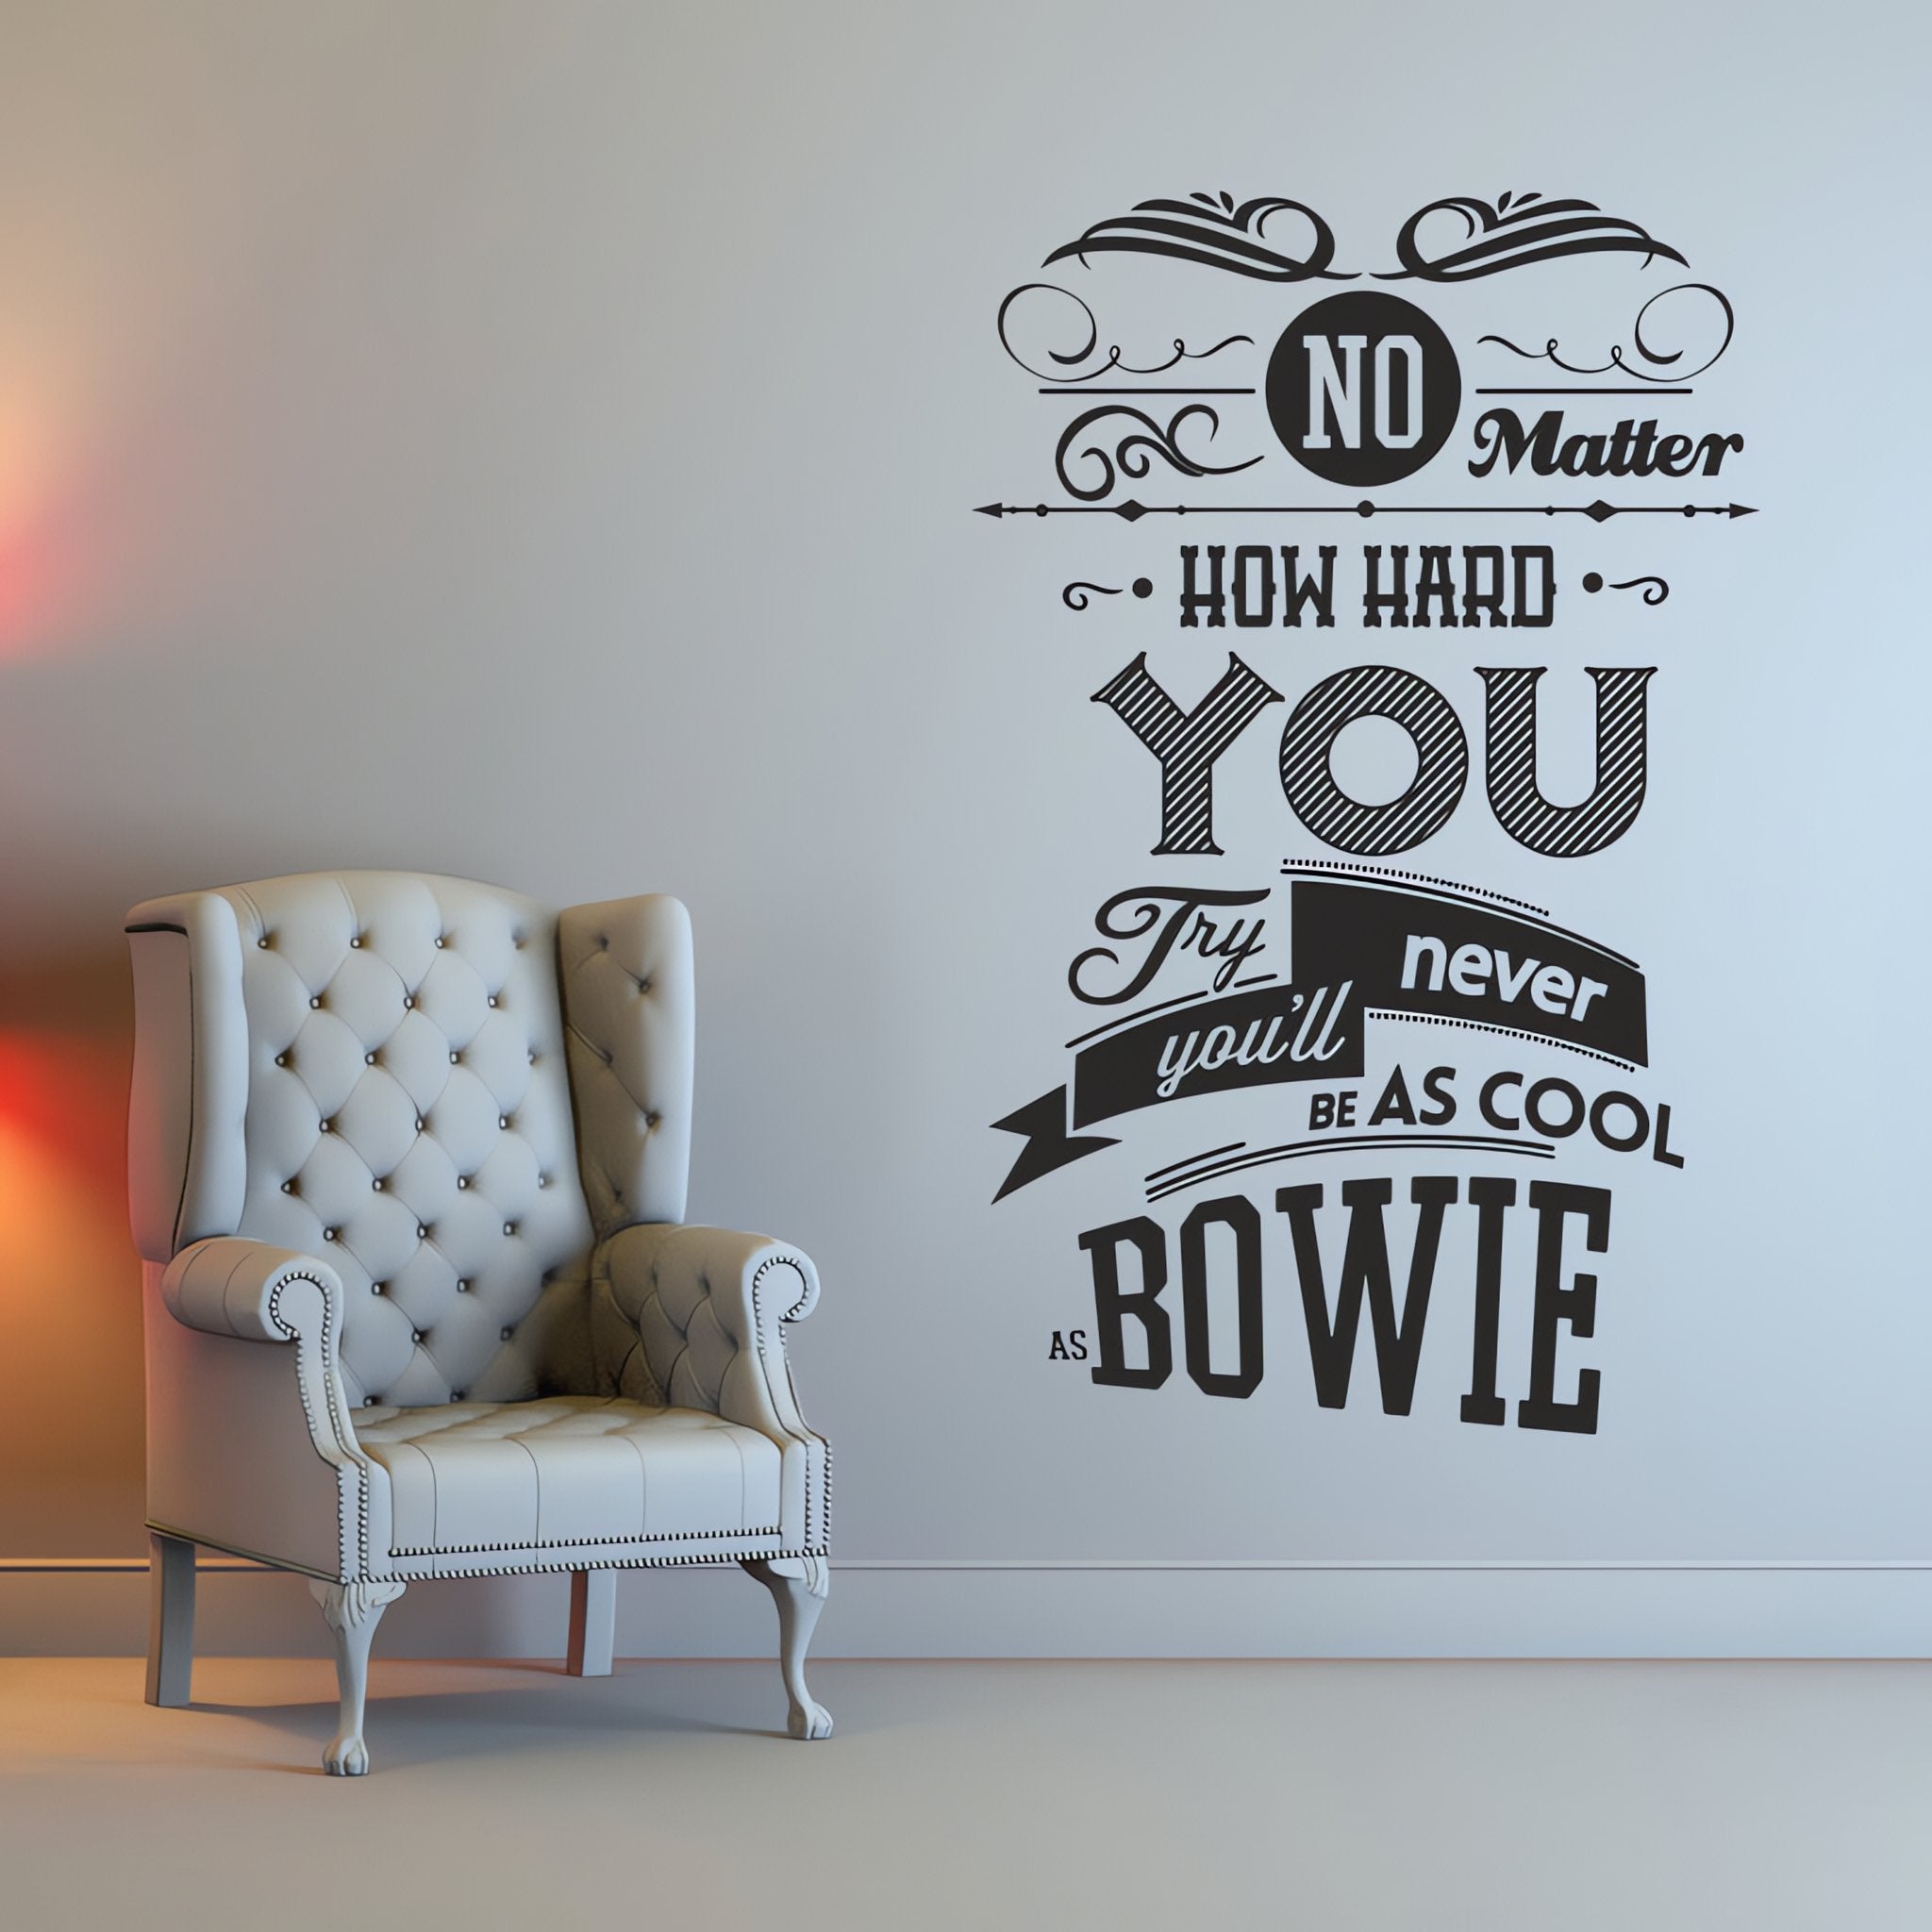 Wall quote sticker with text "No Matter How Hard You Try You'll Never Be As Cool As Bowie" next to a padded arm chair.